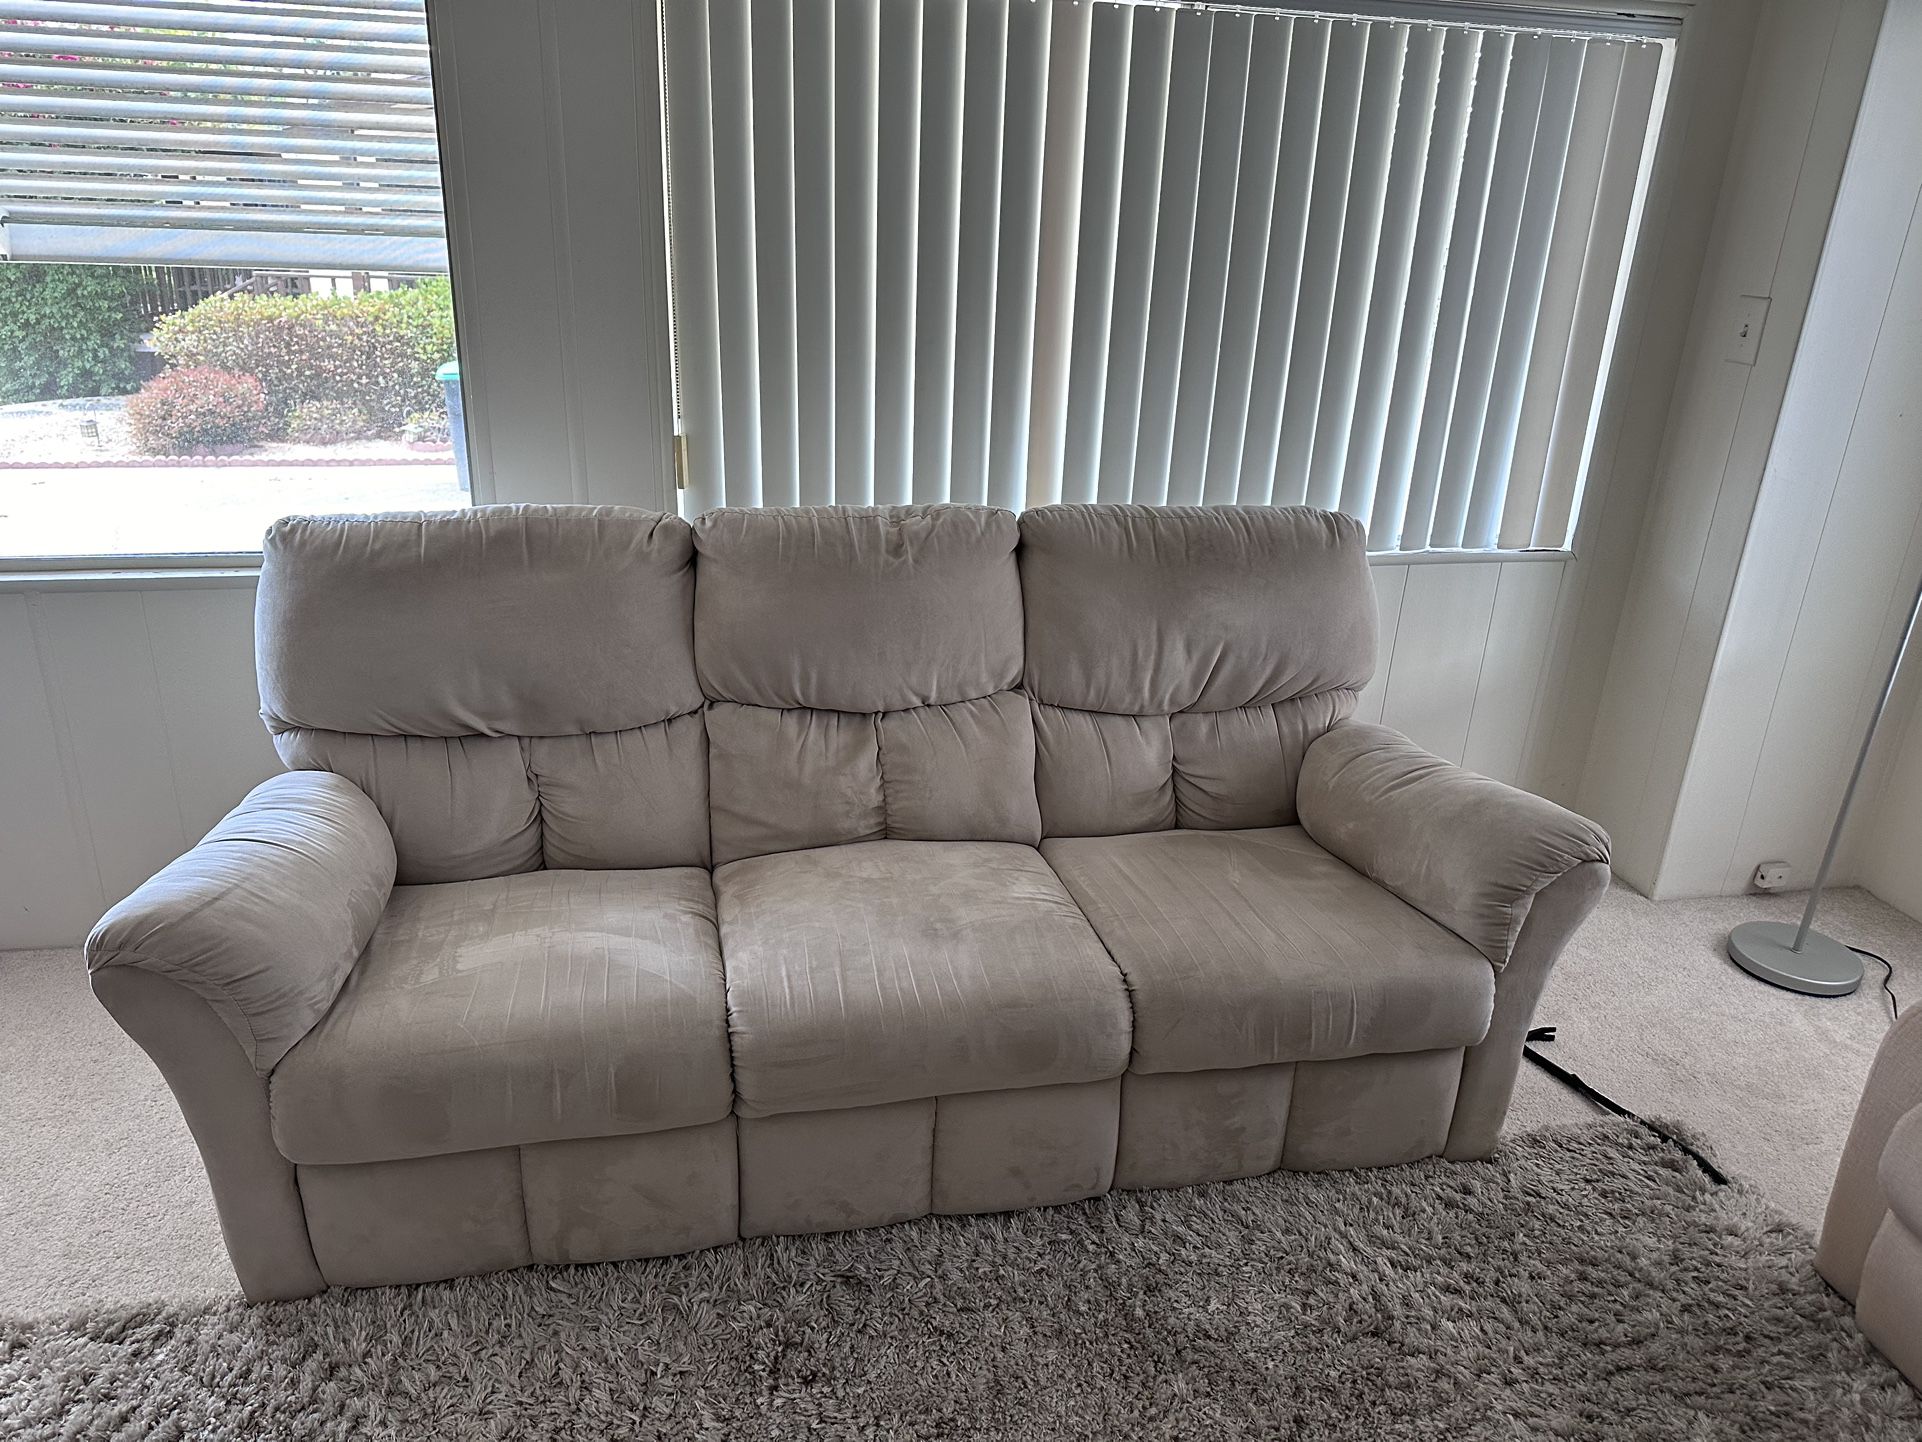 FREE CLEAN SOFA AND RECLINER 